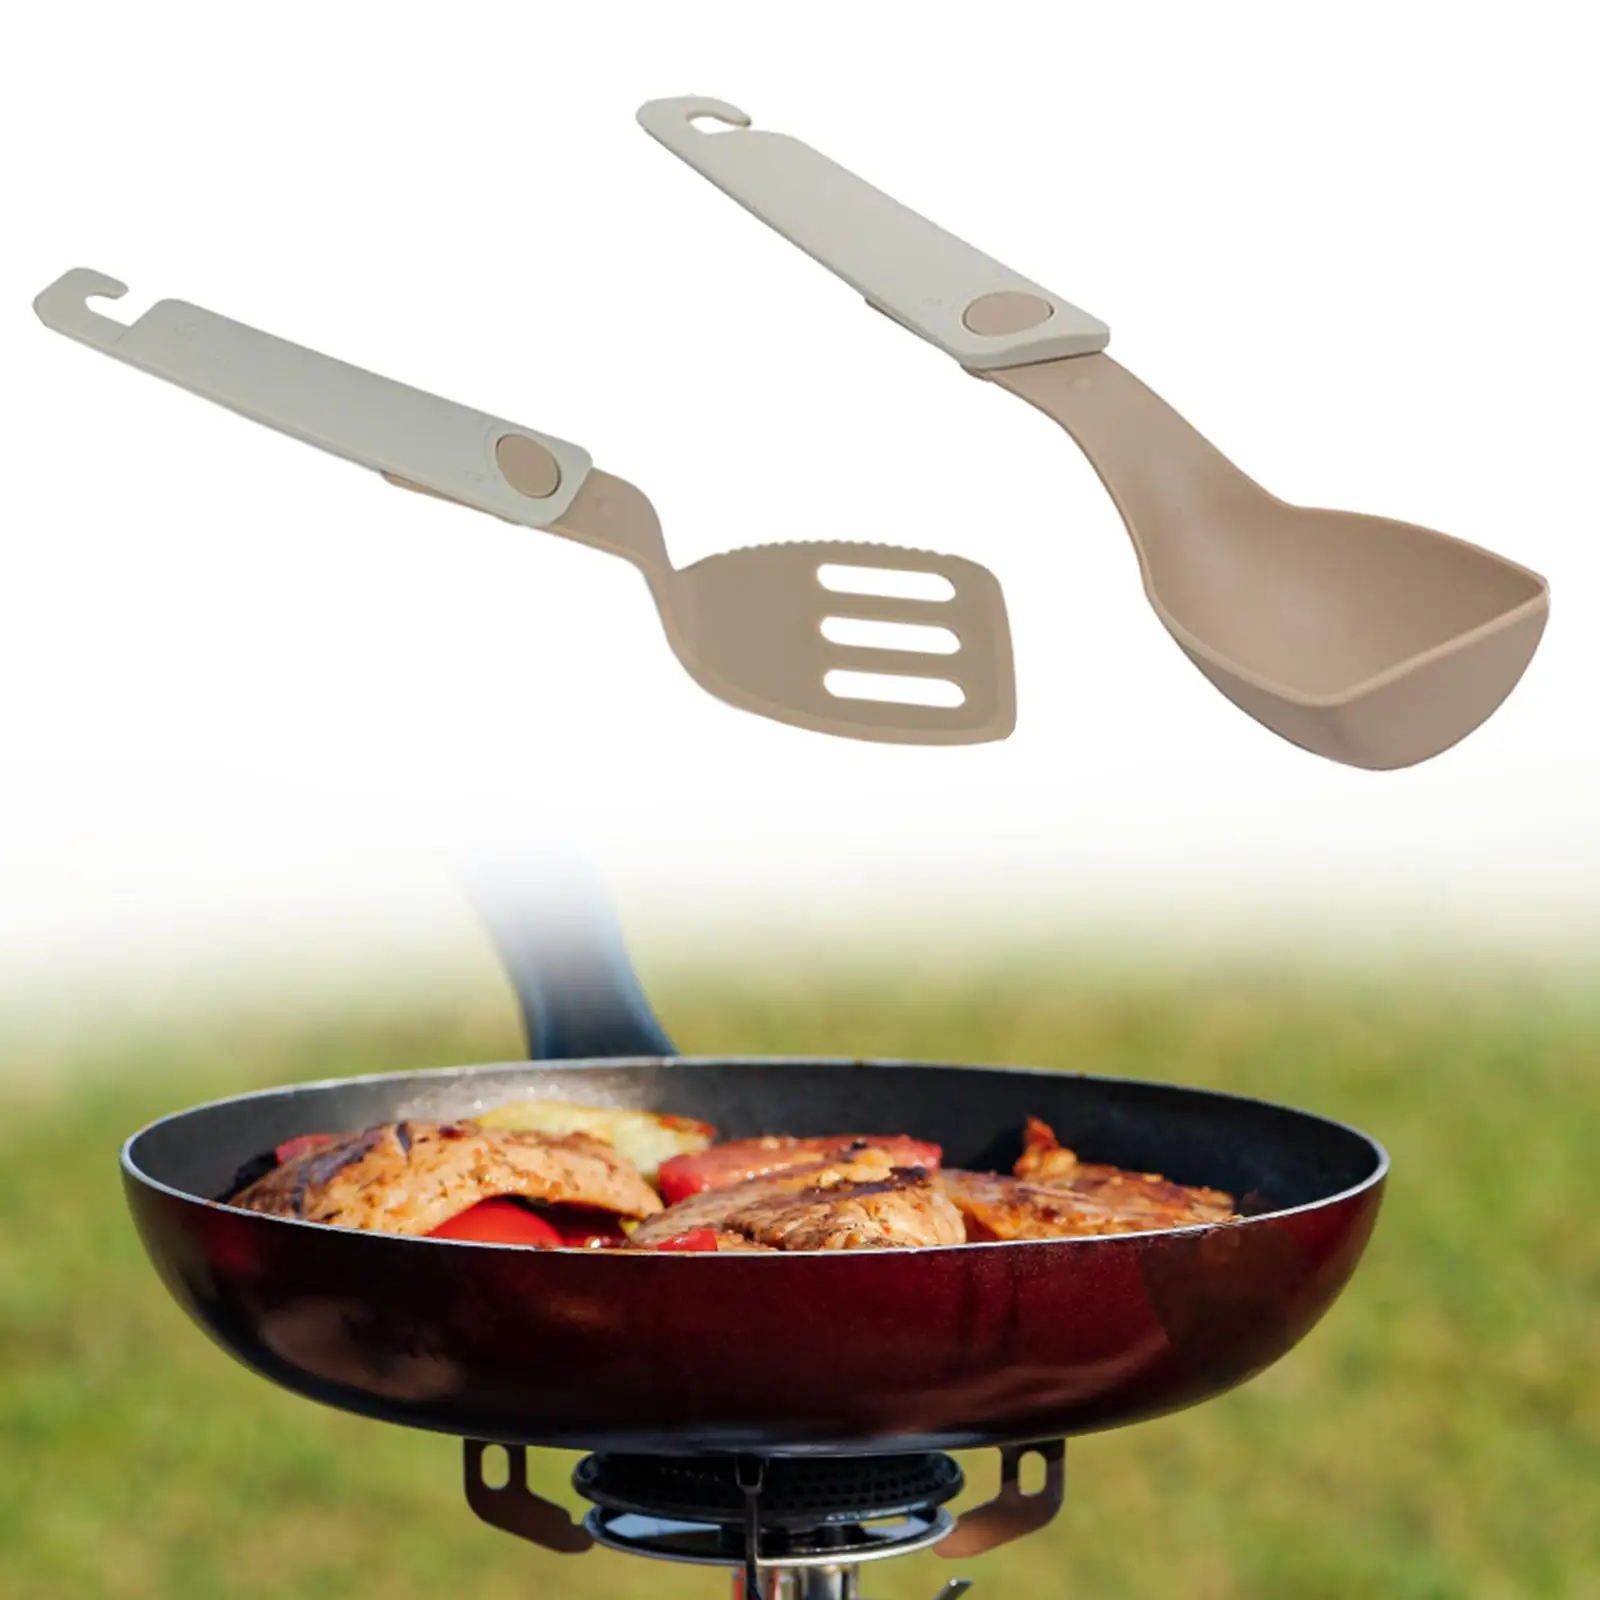 Outdoor Tableware Foldable Cooking Utensil Portable Camping Cutlery Flatware Cookware for Kitchen BBQ Backpacking Travel Picnic